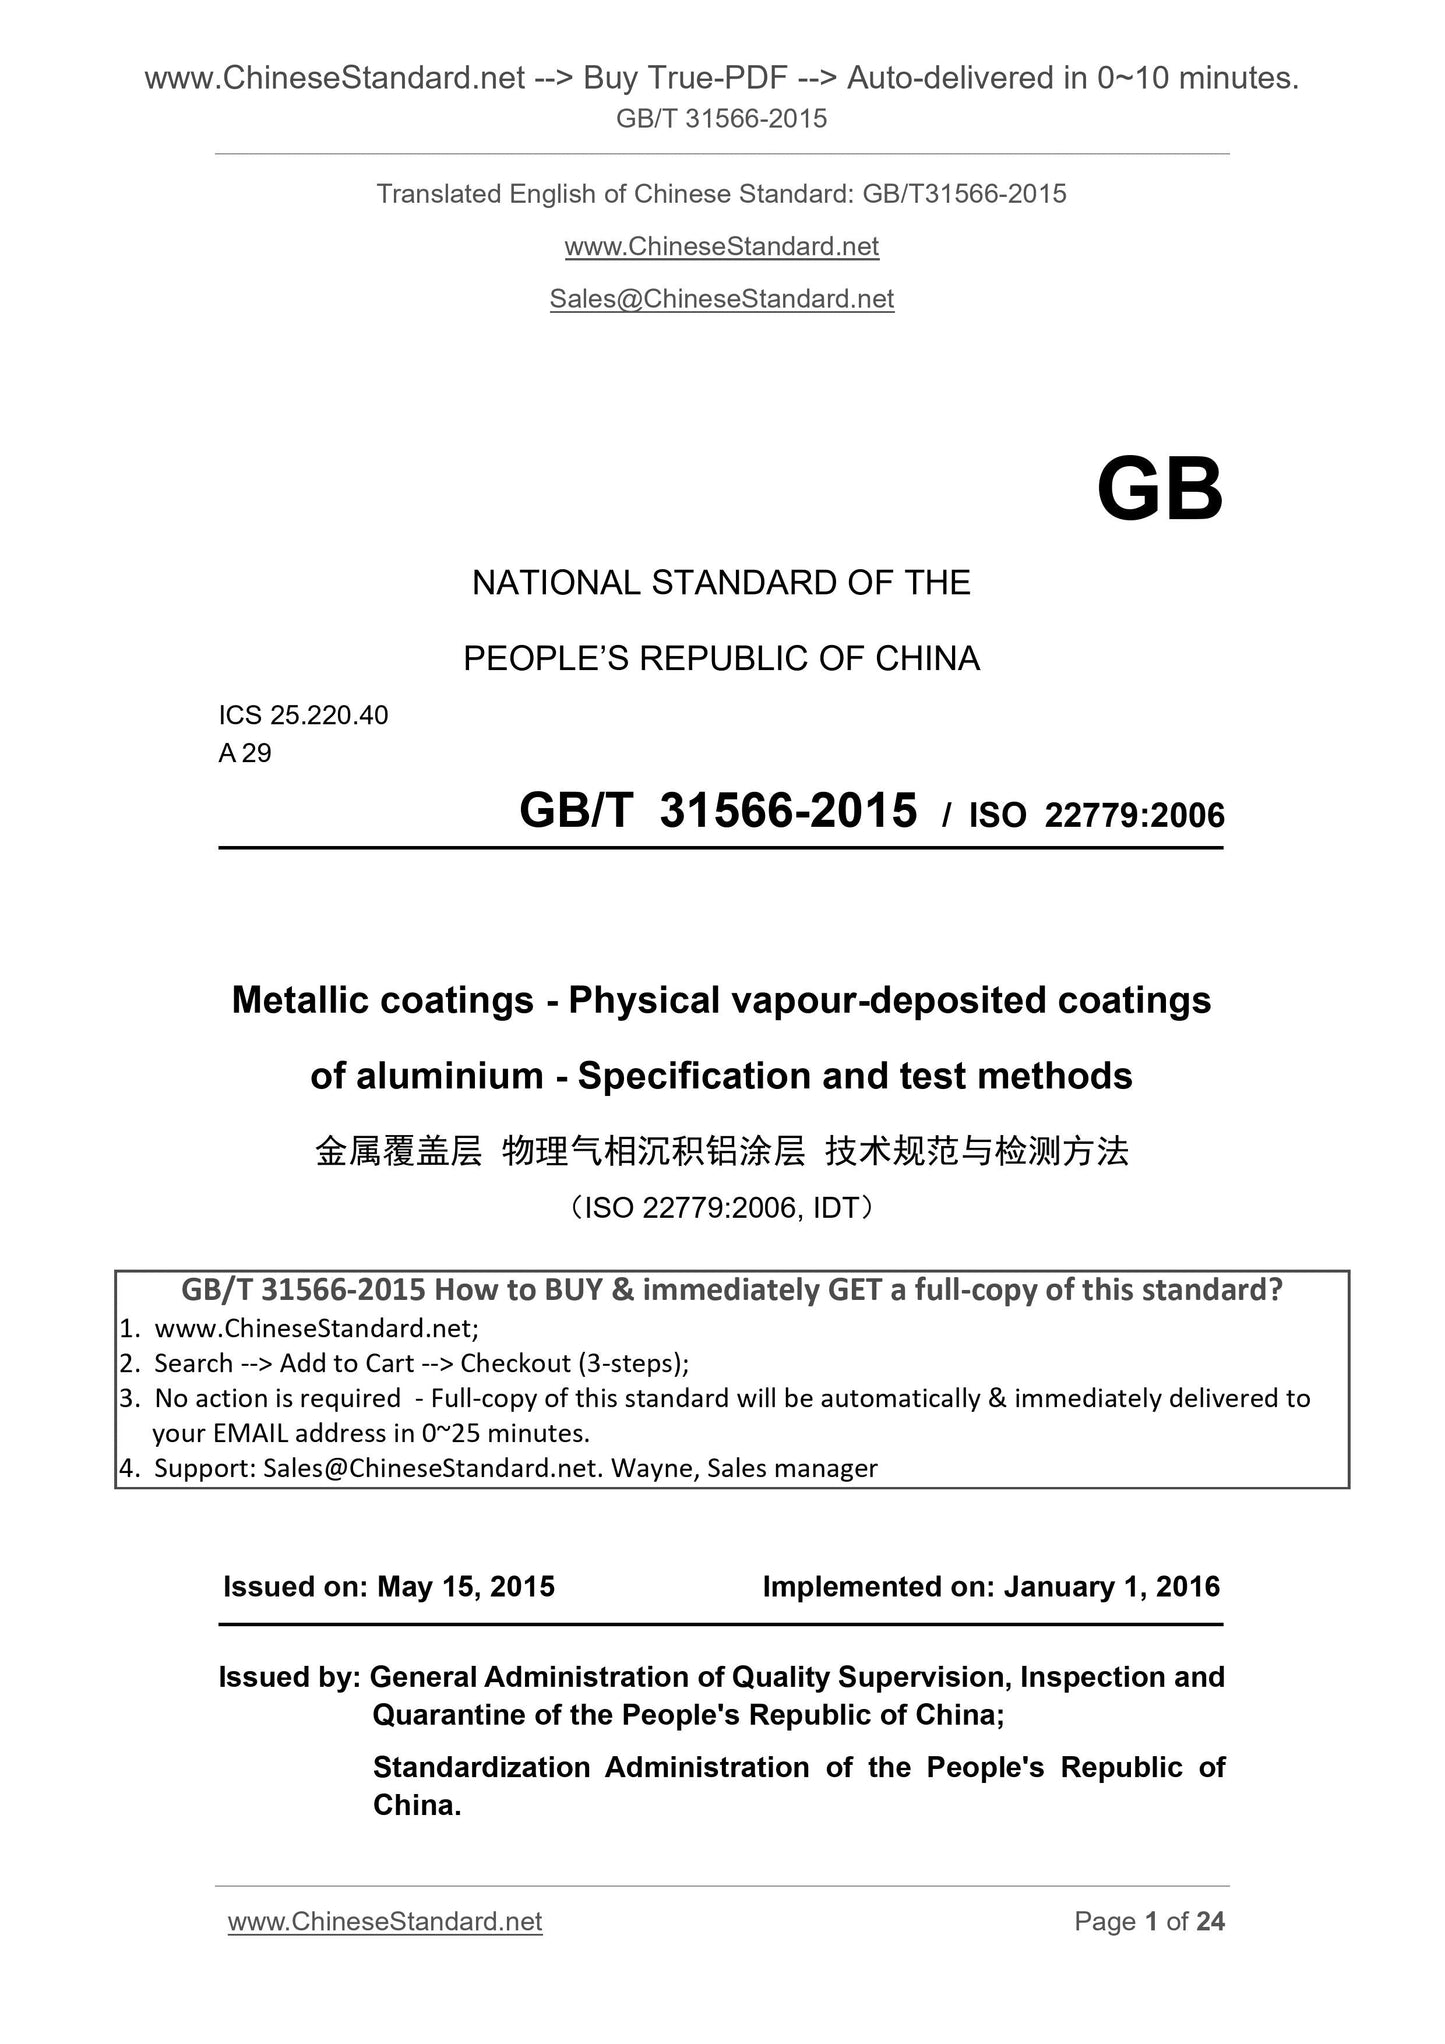 GB/T 31566-2015 Page 1